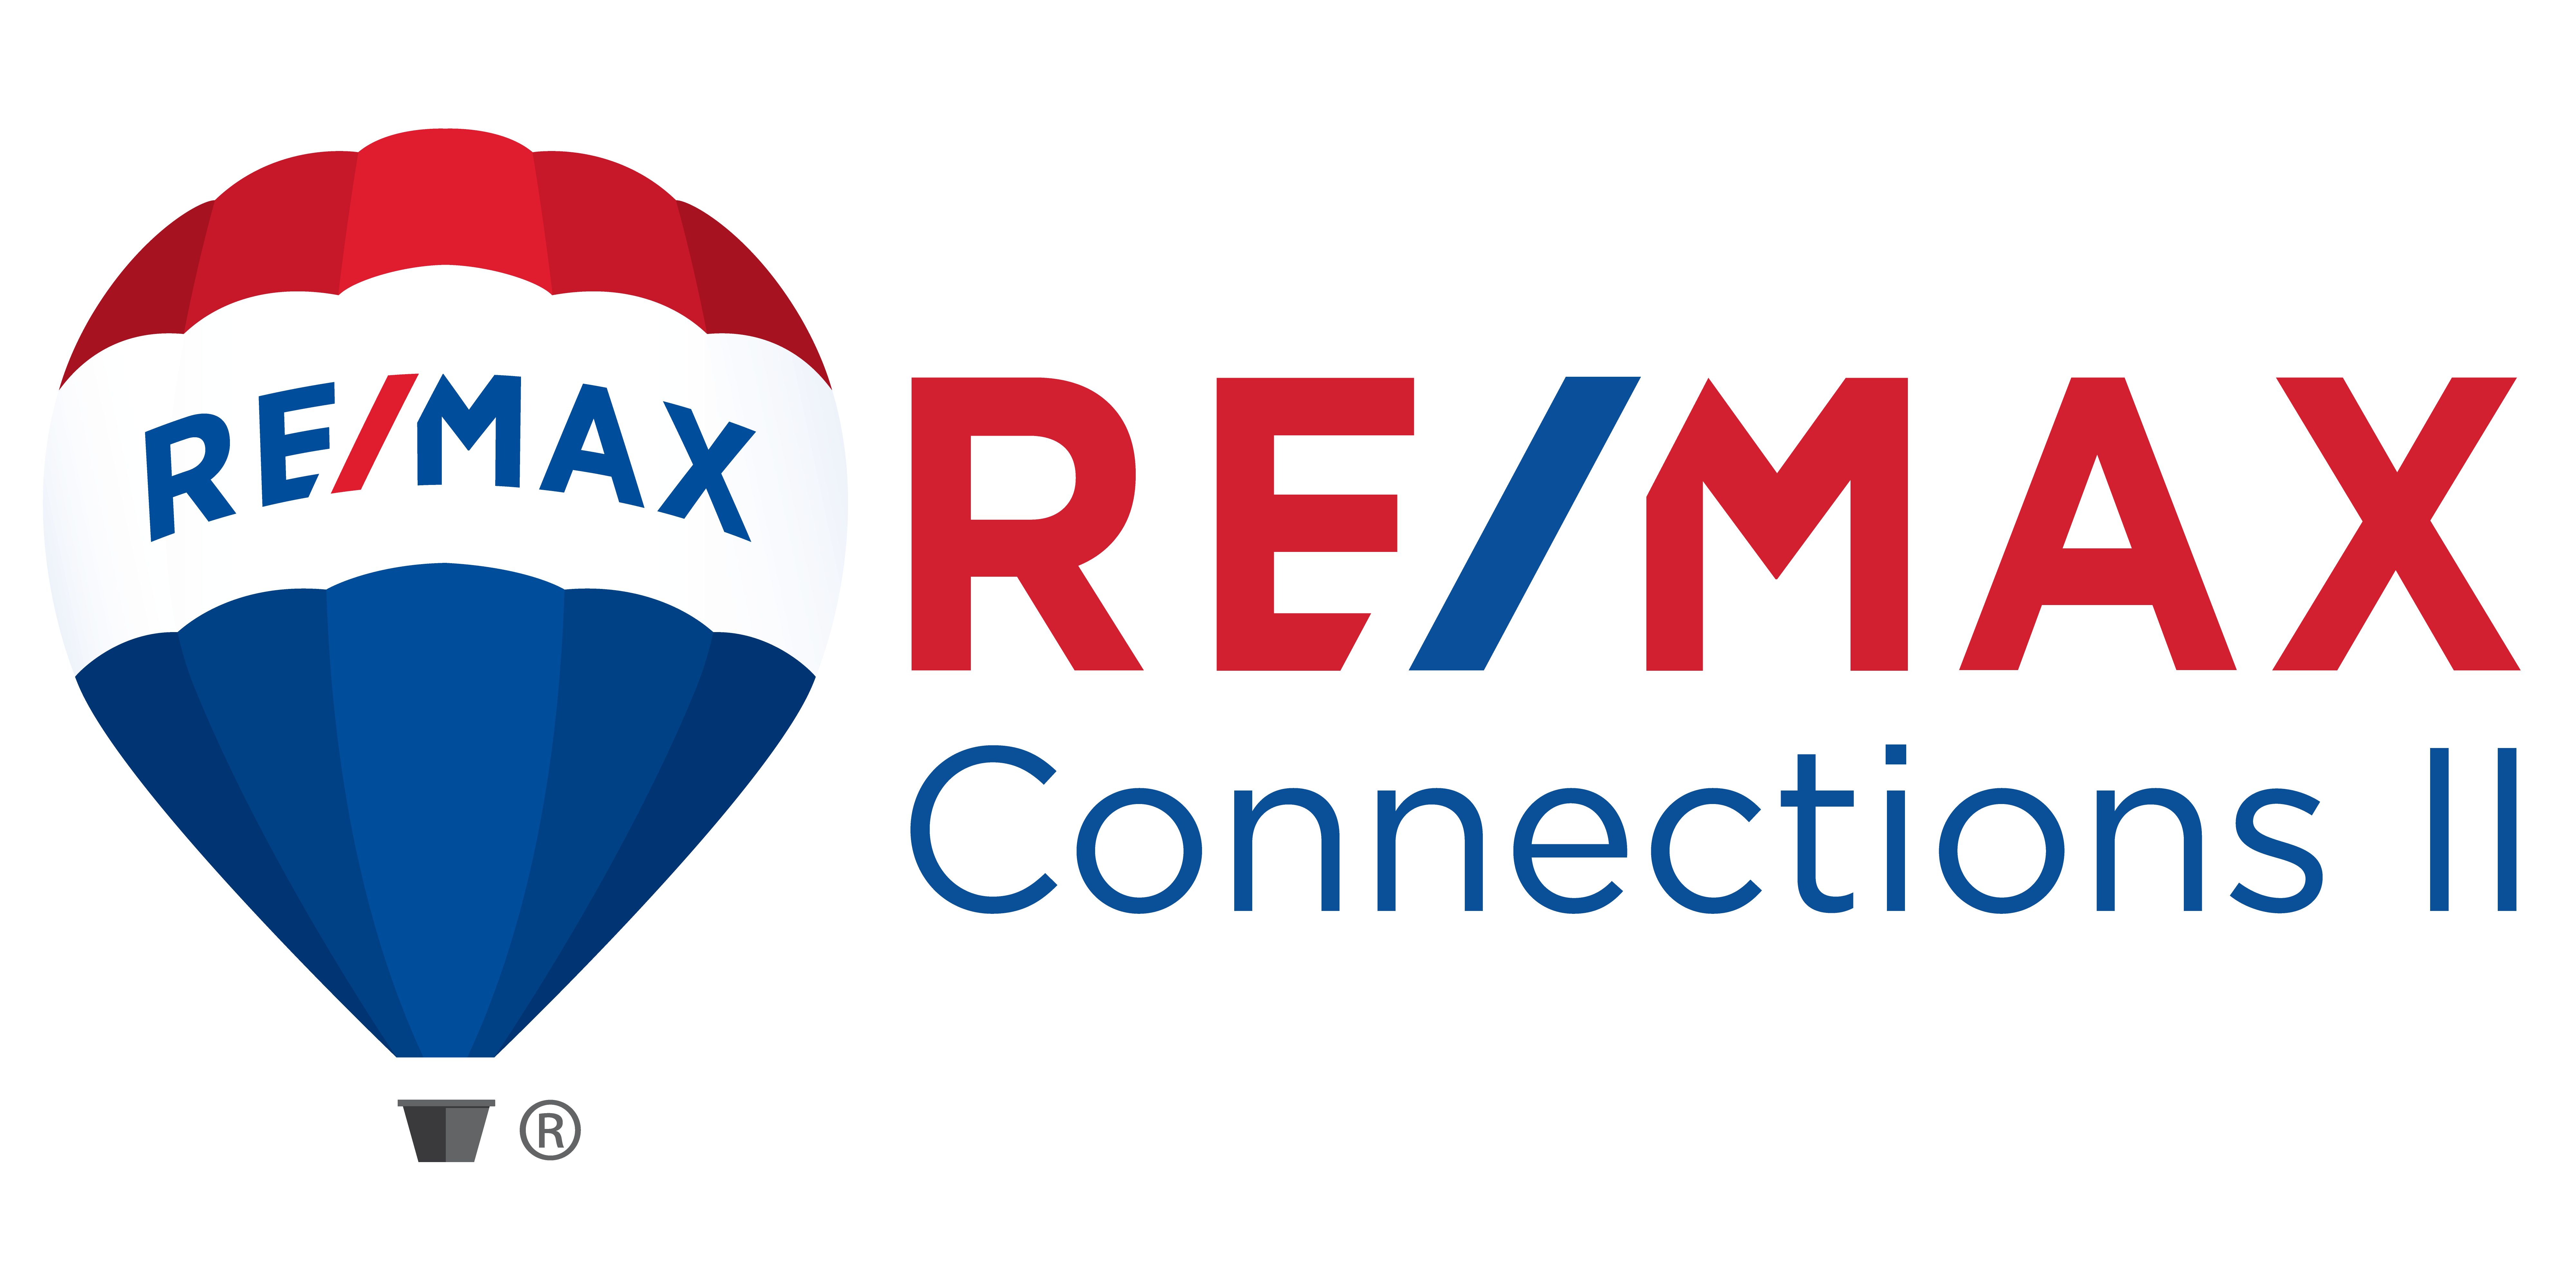 RE/MAX Connections II